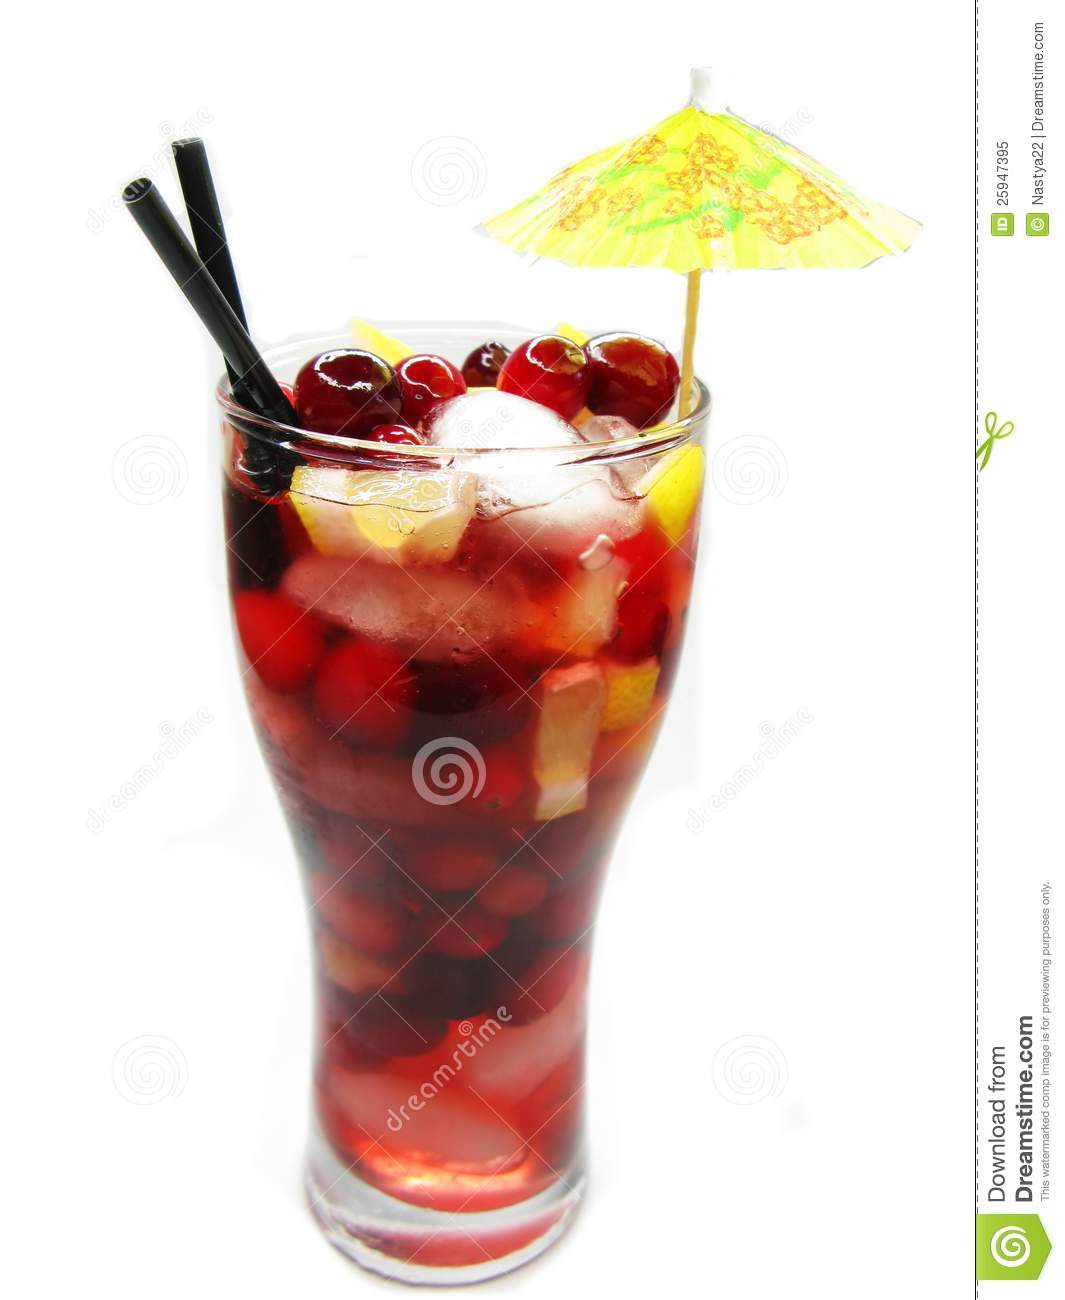 Punch Cocktail Drink With Fruit Royalty Free Stock Photo   Image